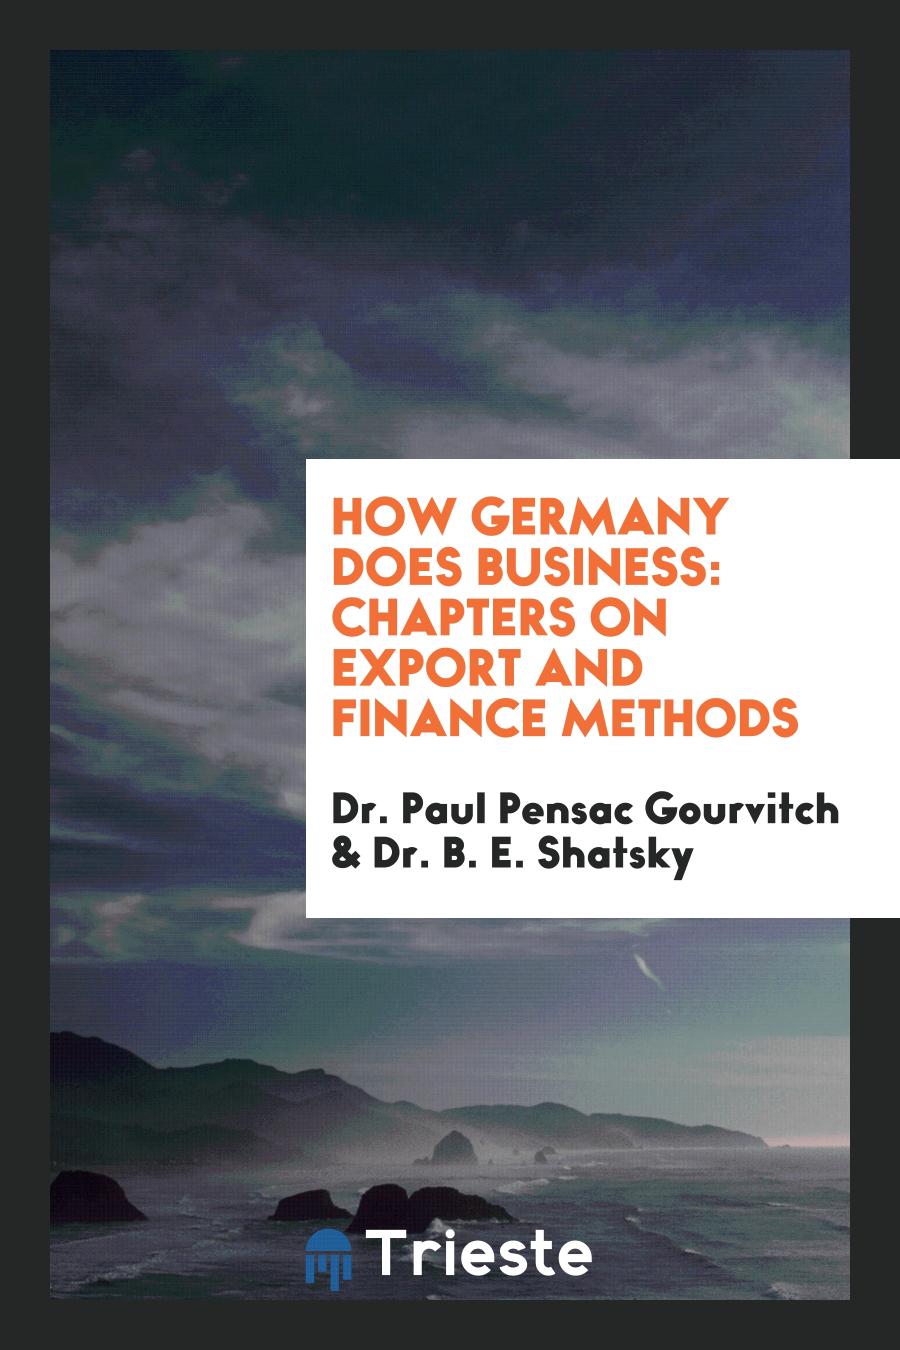 How Germany Does Business: Chapters on Export and Finance Methods